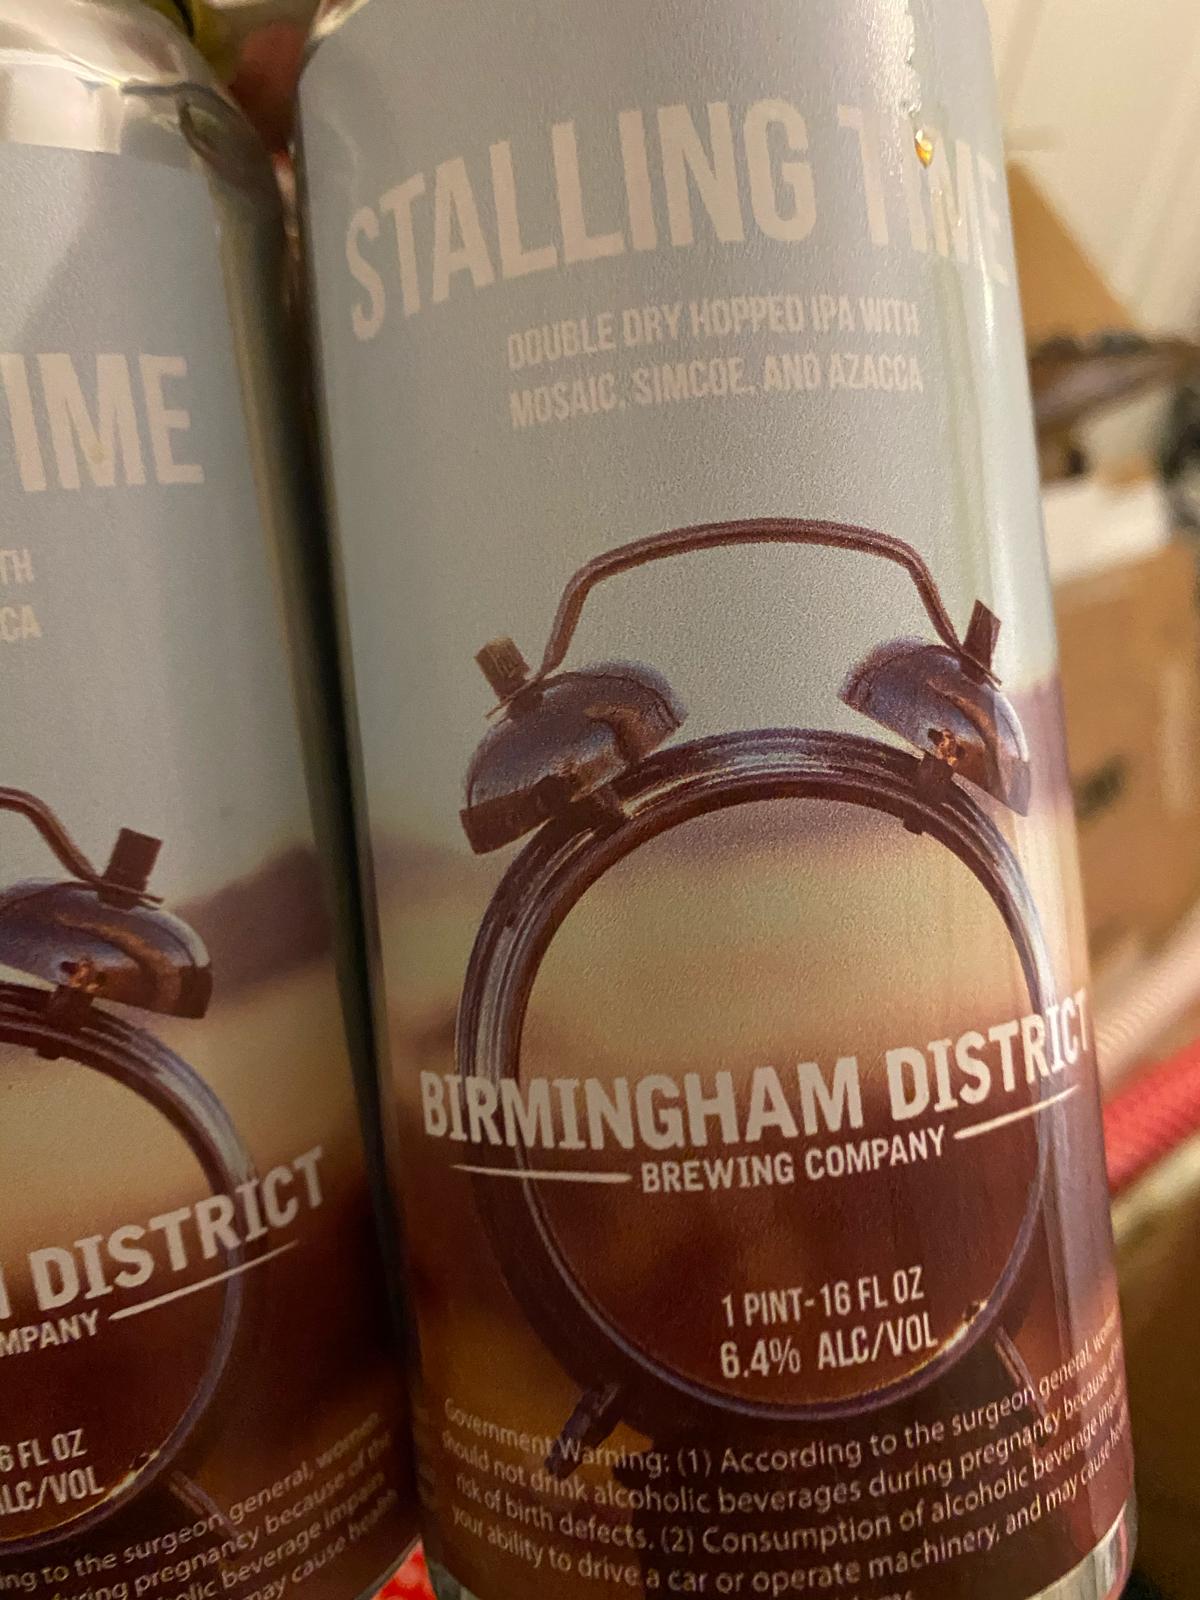 Stalling Time DDH IPA